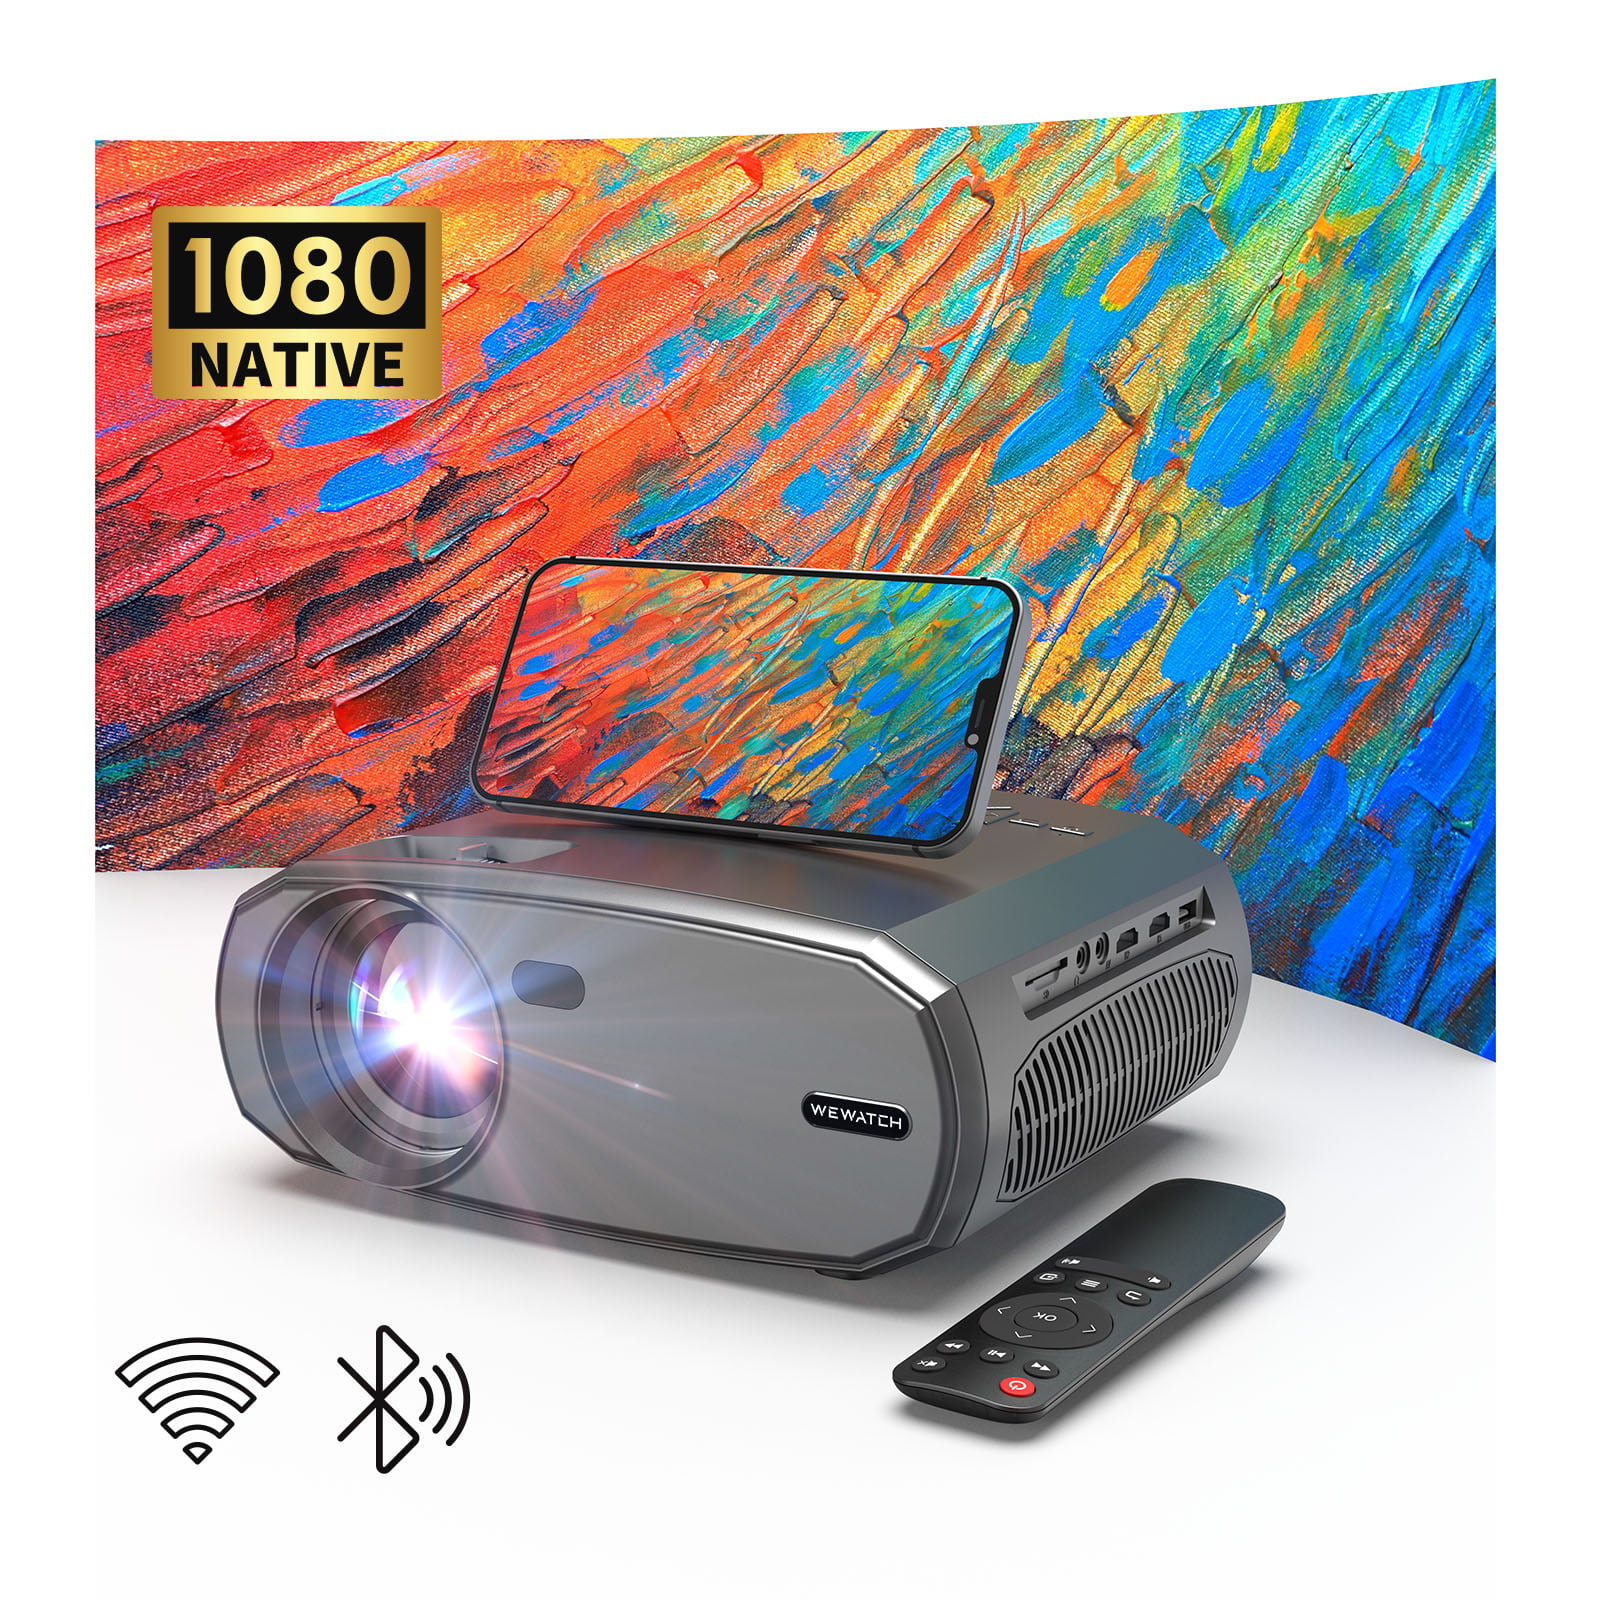 Sagging Regarding pigeon WEWATCH 15000 Lux Native 1080P Portable 5G Wifi Movie Projector with  Bluetooth 4.1, 200" Projection Size, Keystone Correction & 100% Zoom,  Compatible W/ TV Stick, HDMI, VGA, USB, Laptop, iOS & Android - Walmart.com